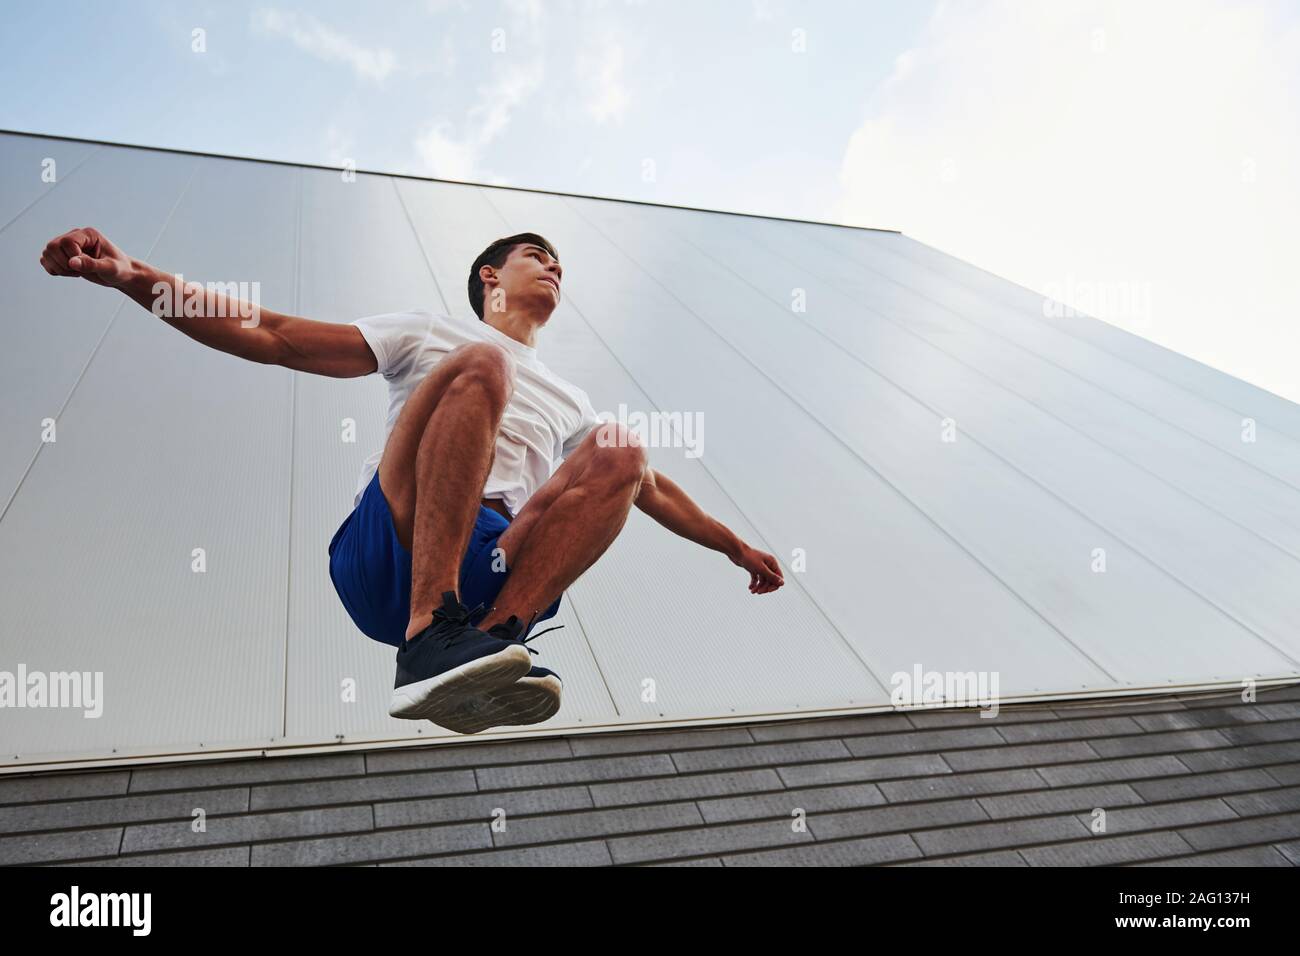 Into the air. Young sports man doing parkour in the city at sunny daytime Stock Photo